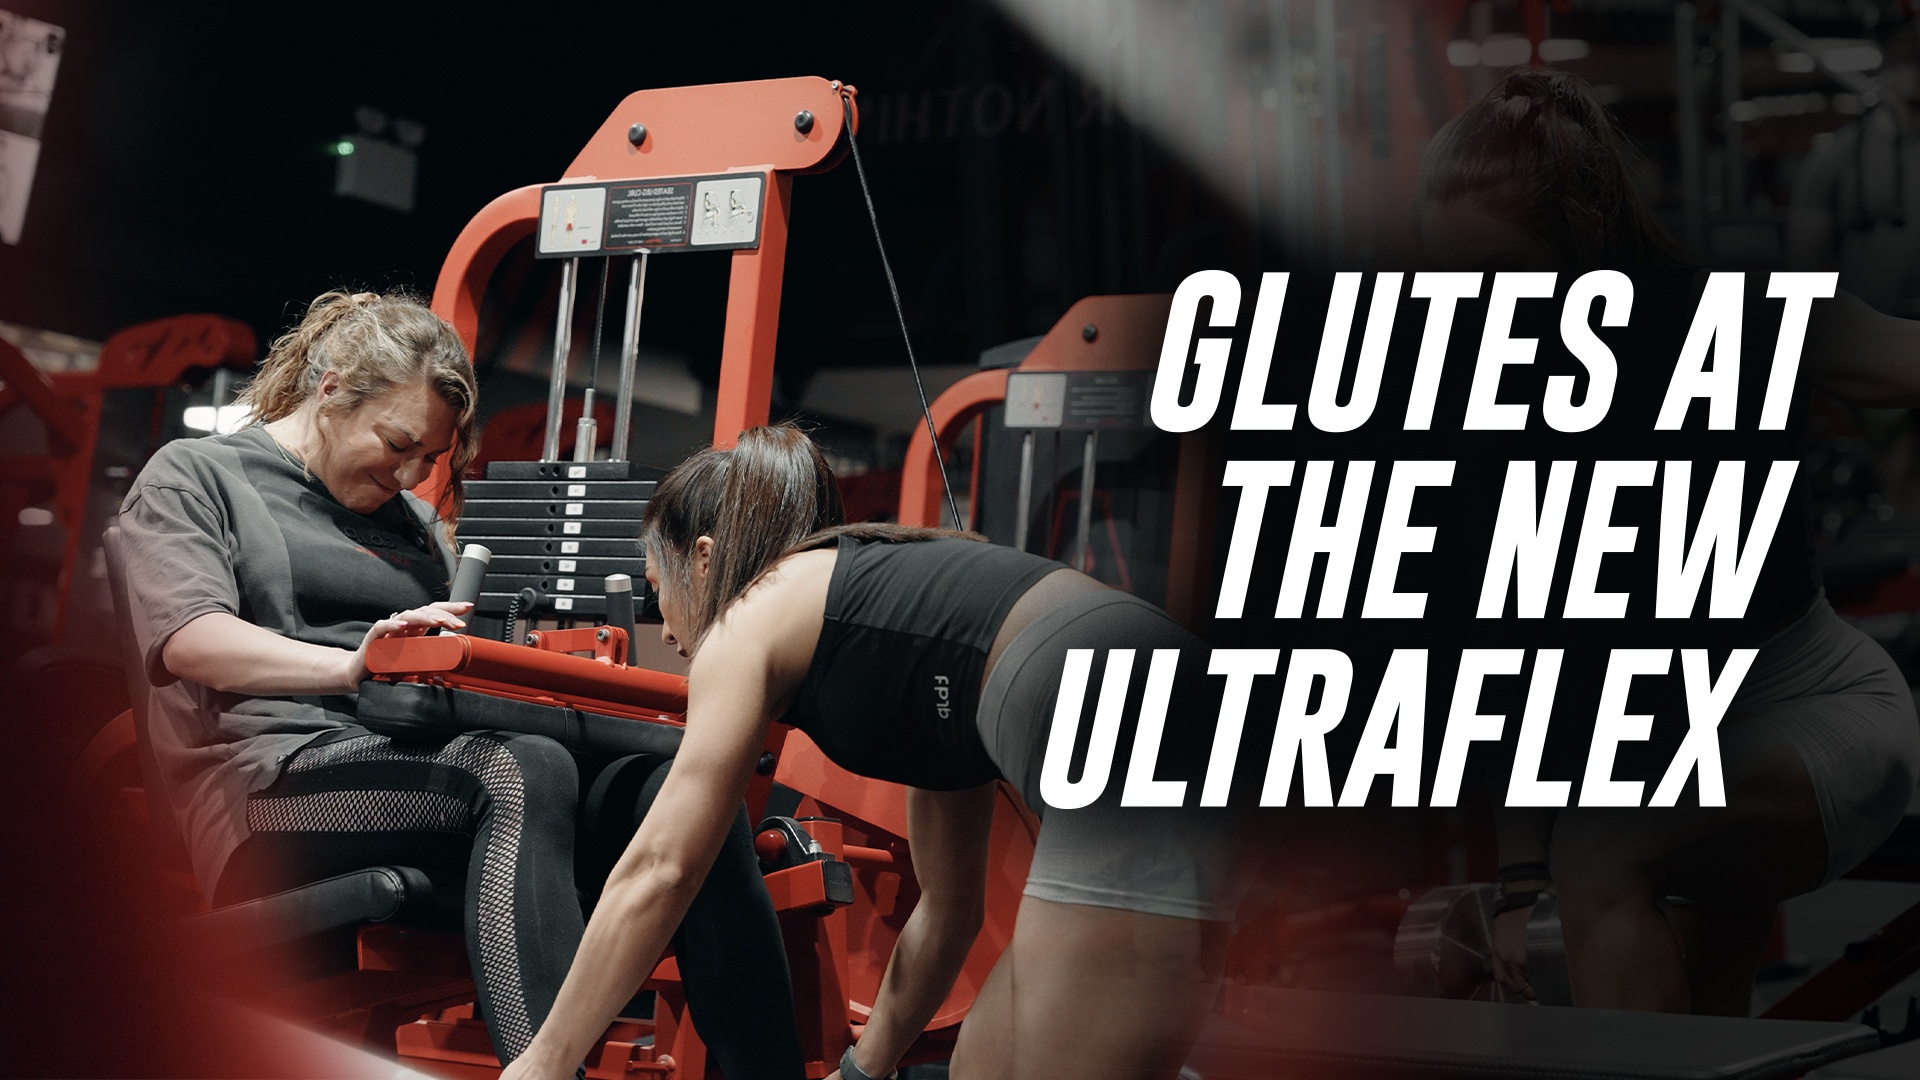 GLUTES AT THE NEW ULTRAFLEX